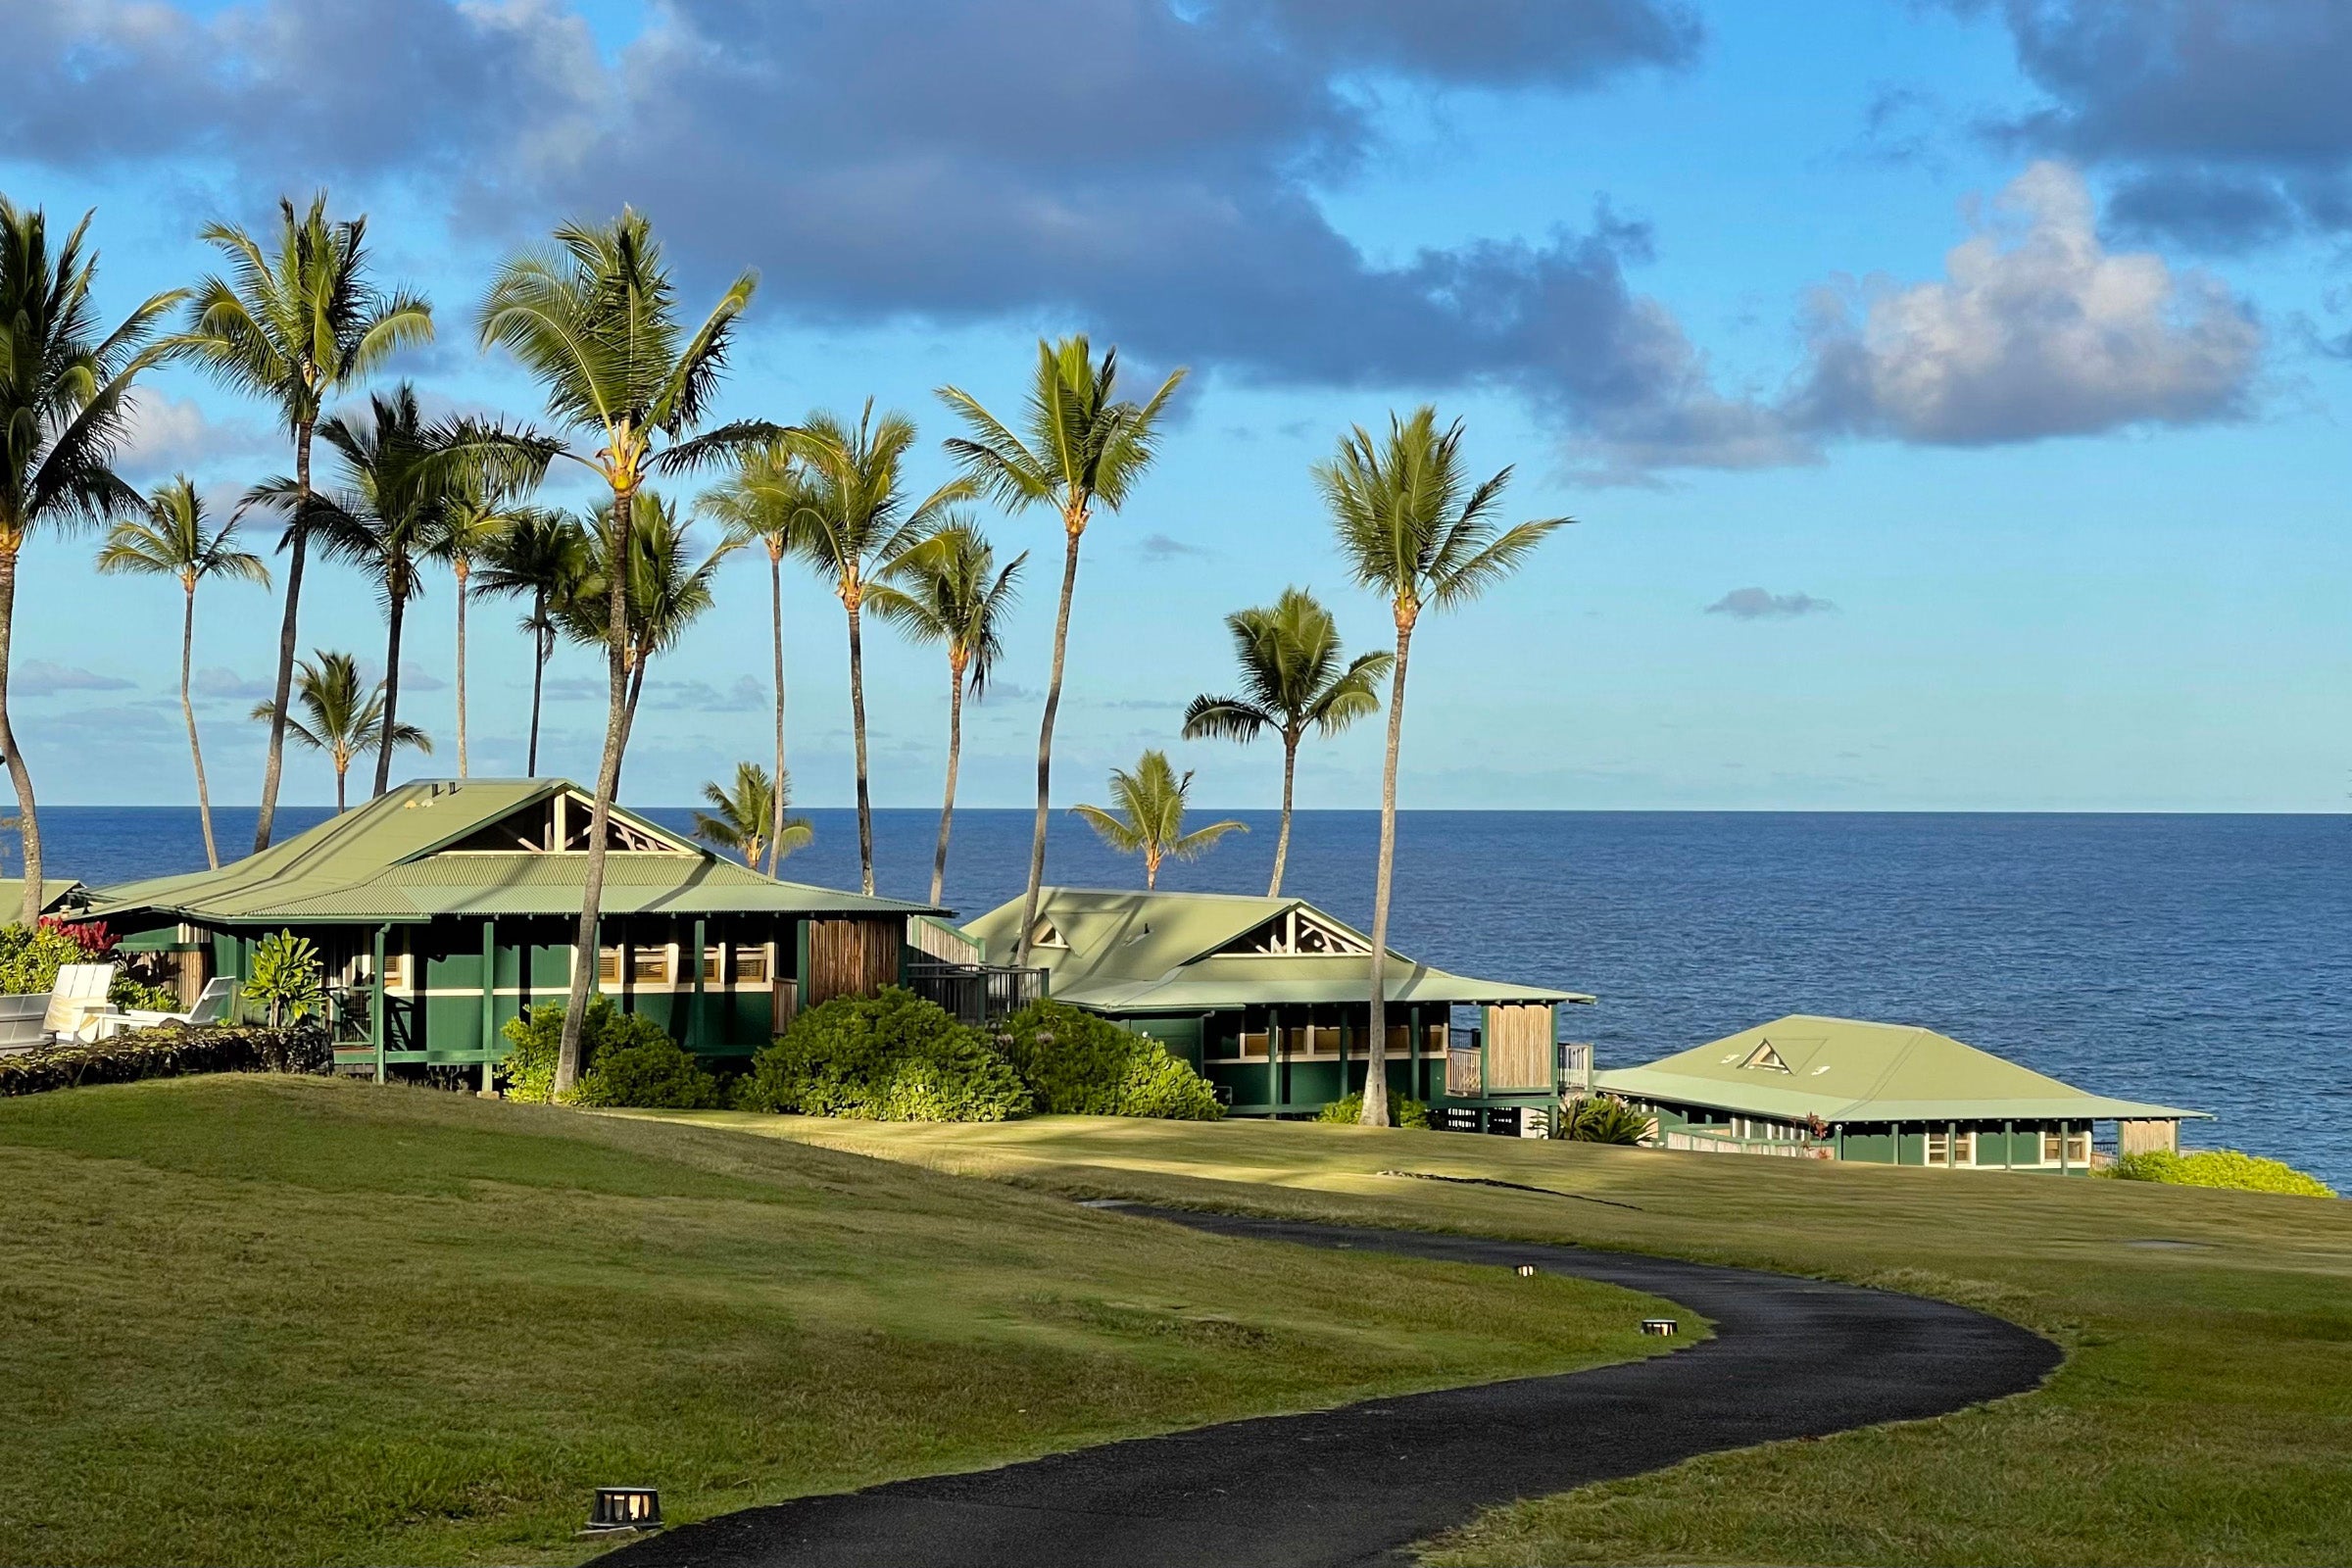 Maui COVID19 travel restrictions What you need to know about visiting this Hawaiian island